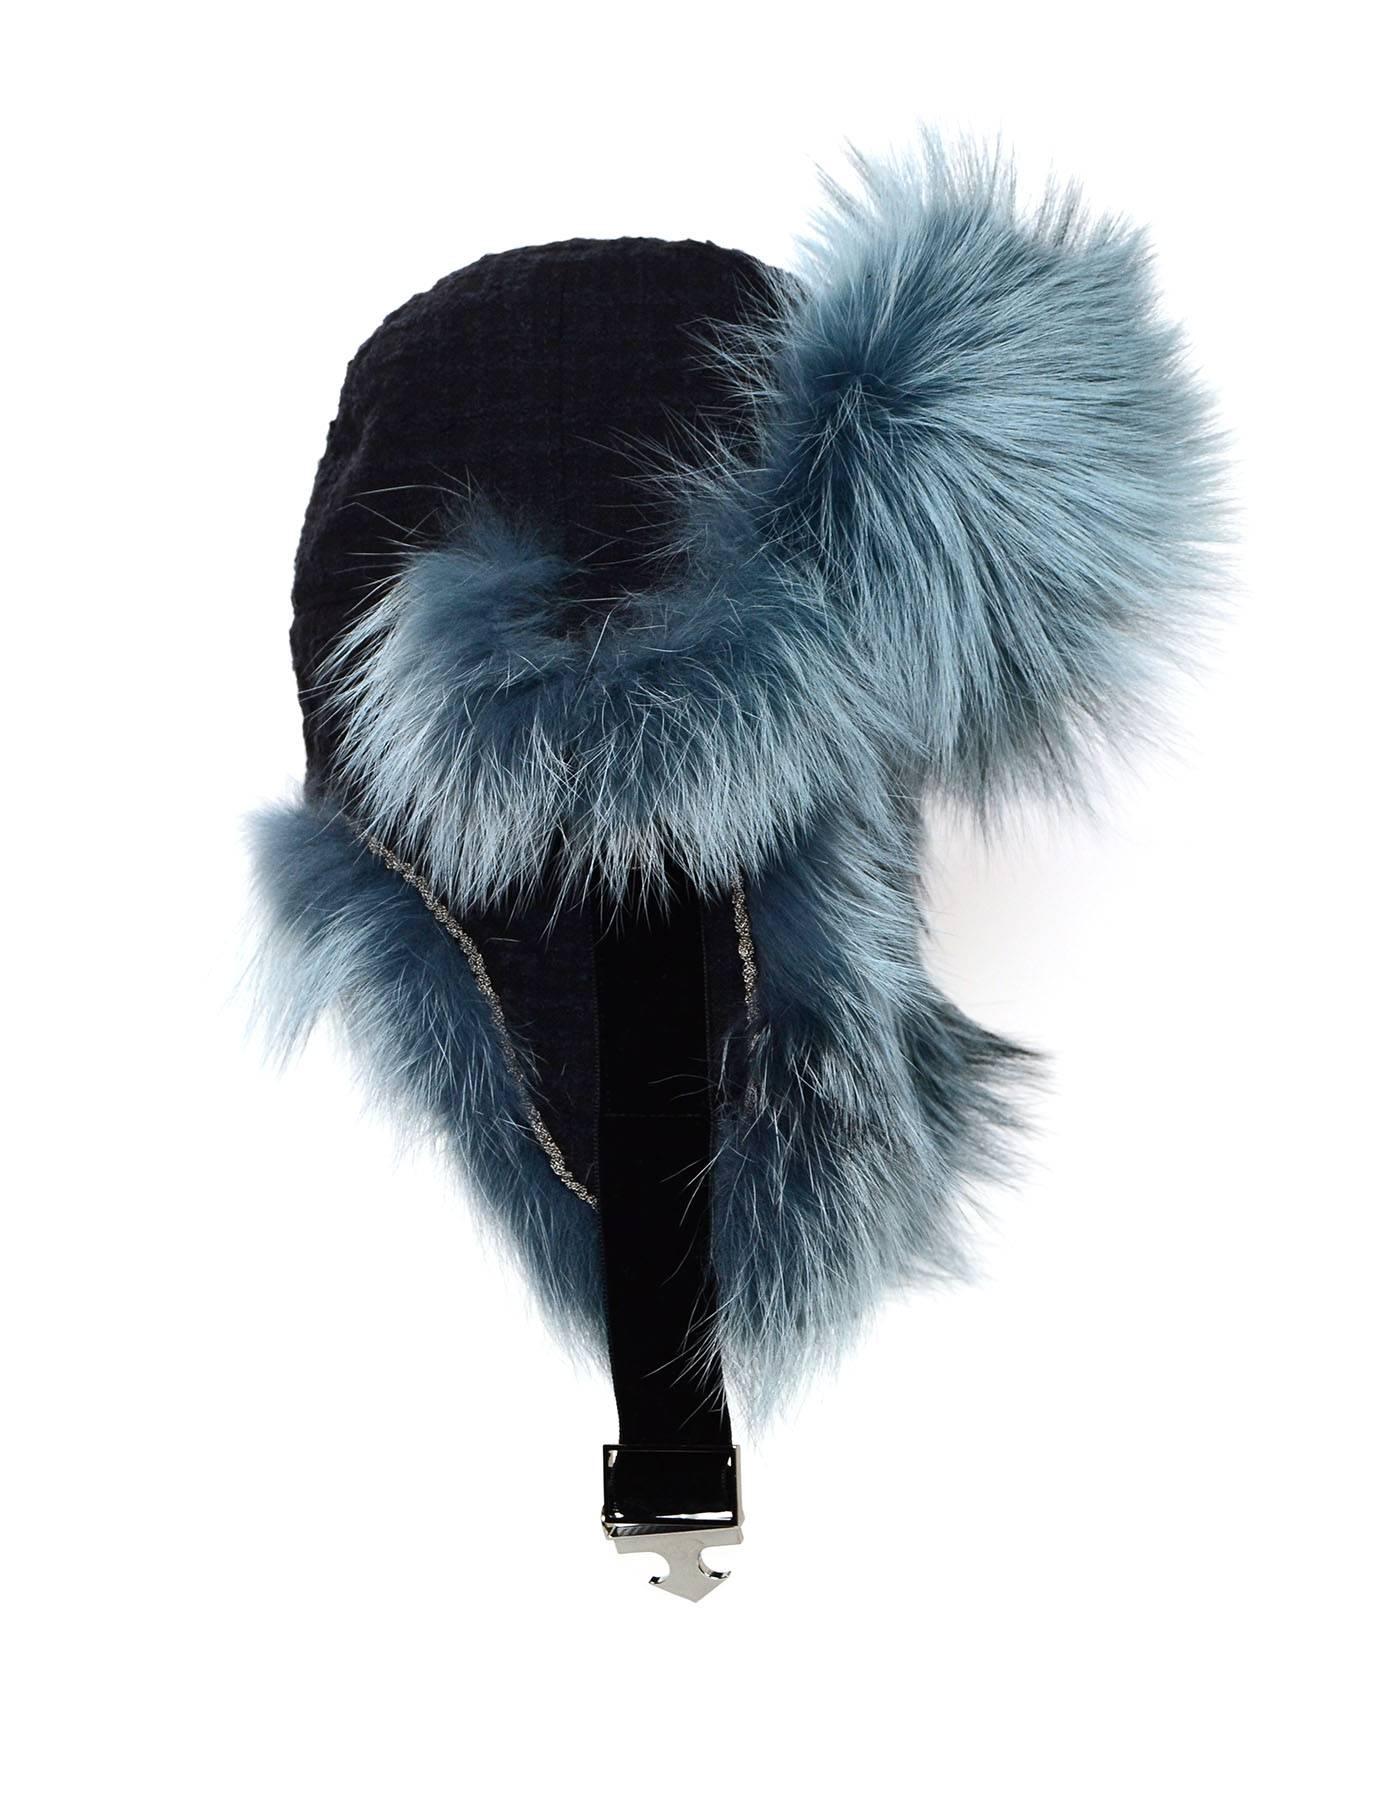 Chanel Blue Fox Fur Aviator Hat Sz 57
Features Black and blue boucle exterior with chain trim, and black velvet buckle closure at neck

Chanel Blue Fox Fur Aviator Hat Sz 57

Features Black boucle exterior and black velvet buckle closure at